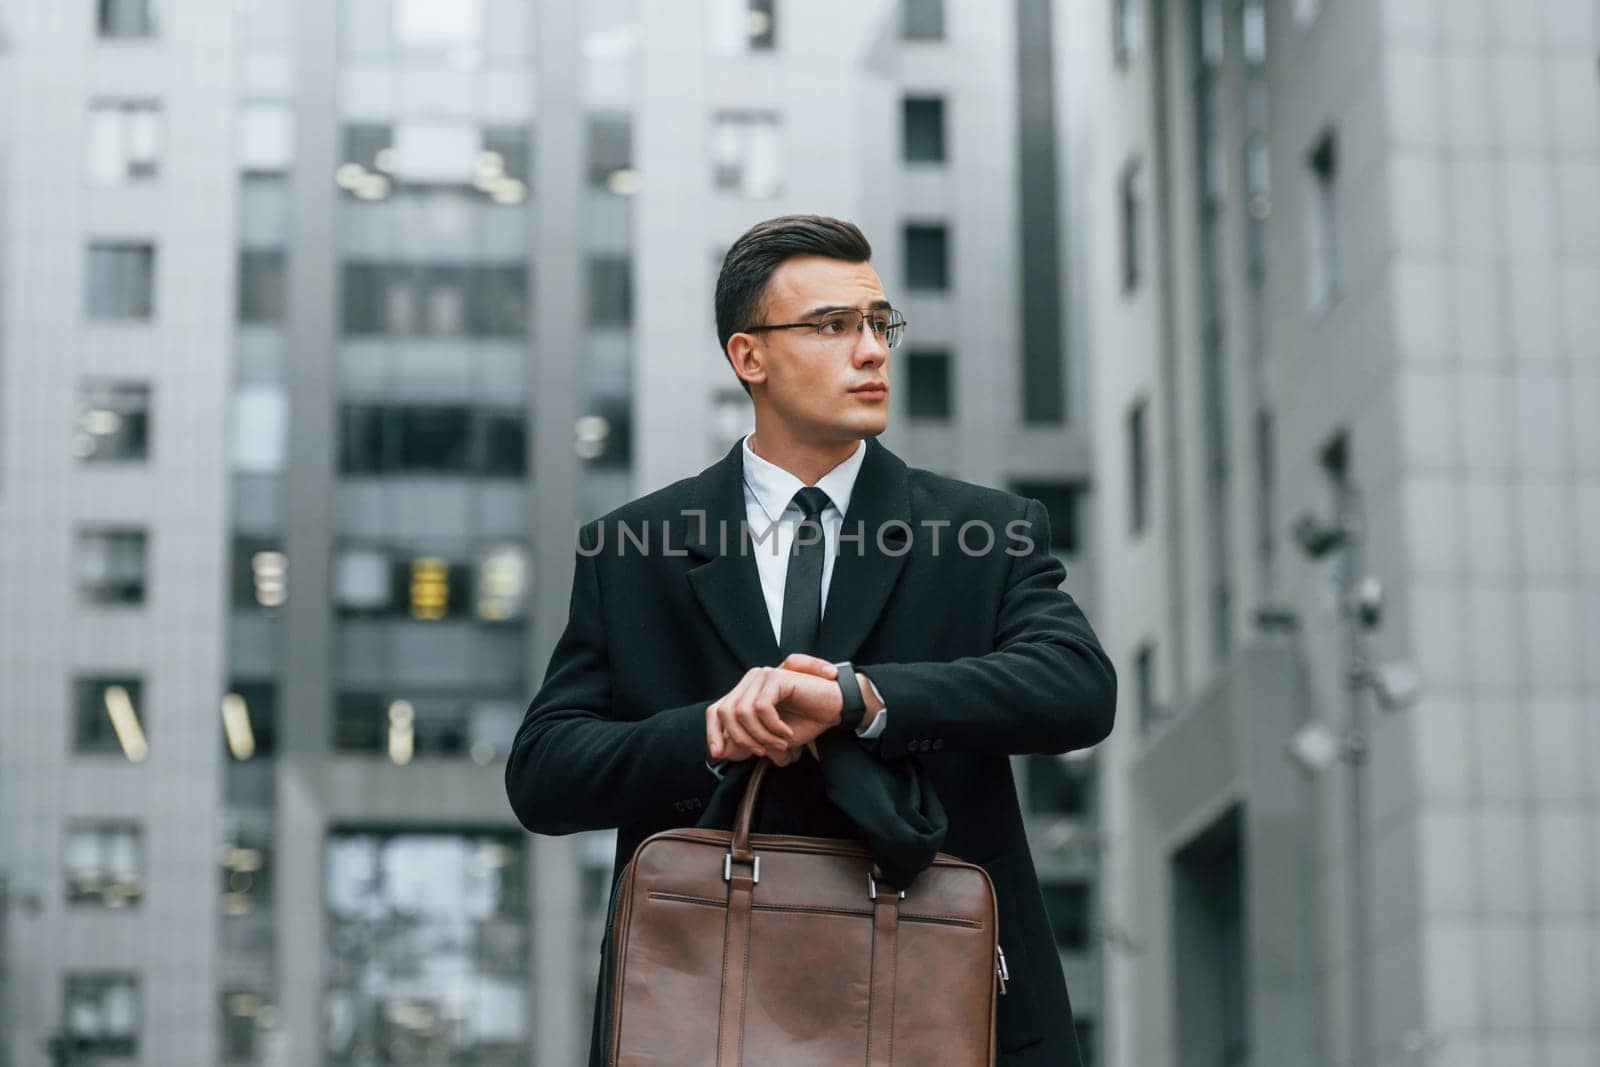 Checking the time. Businessman in black suit and tie is outdoors in the city.